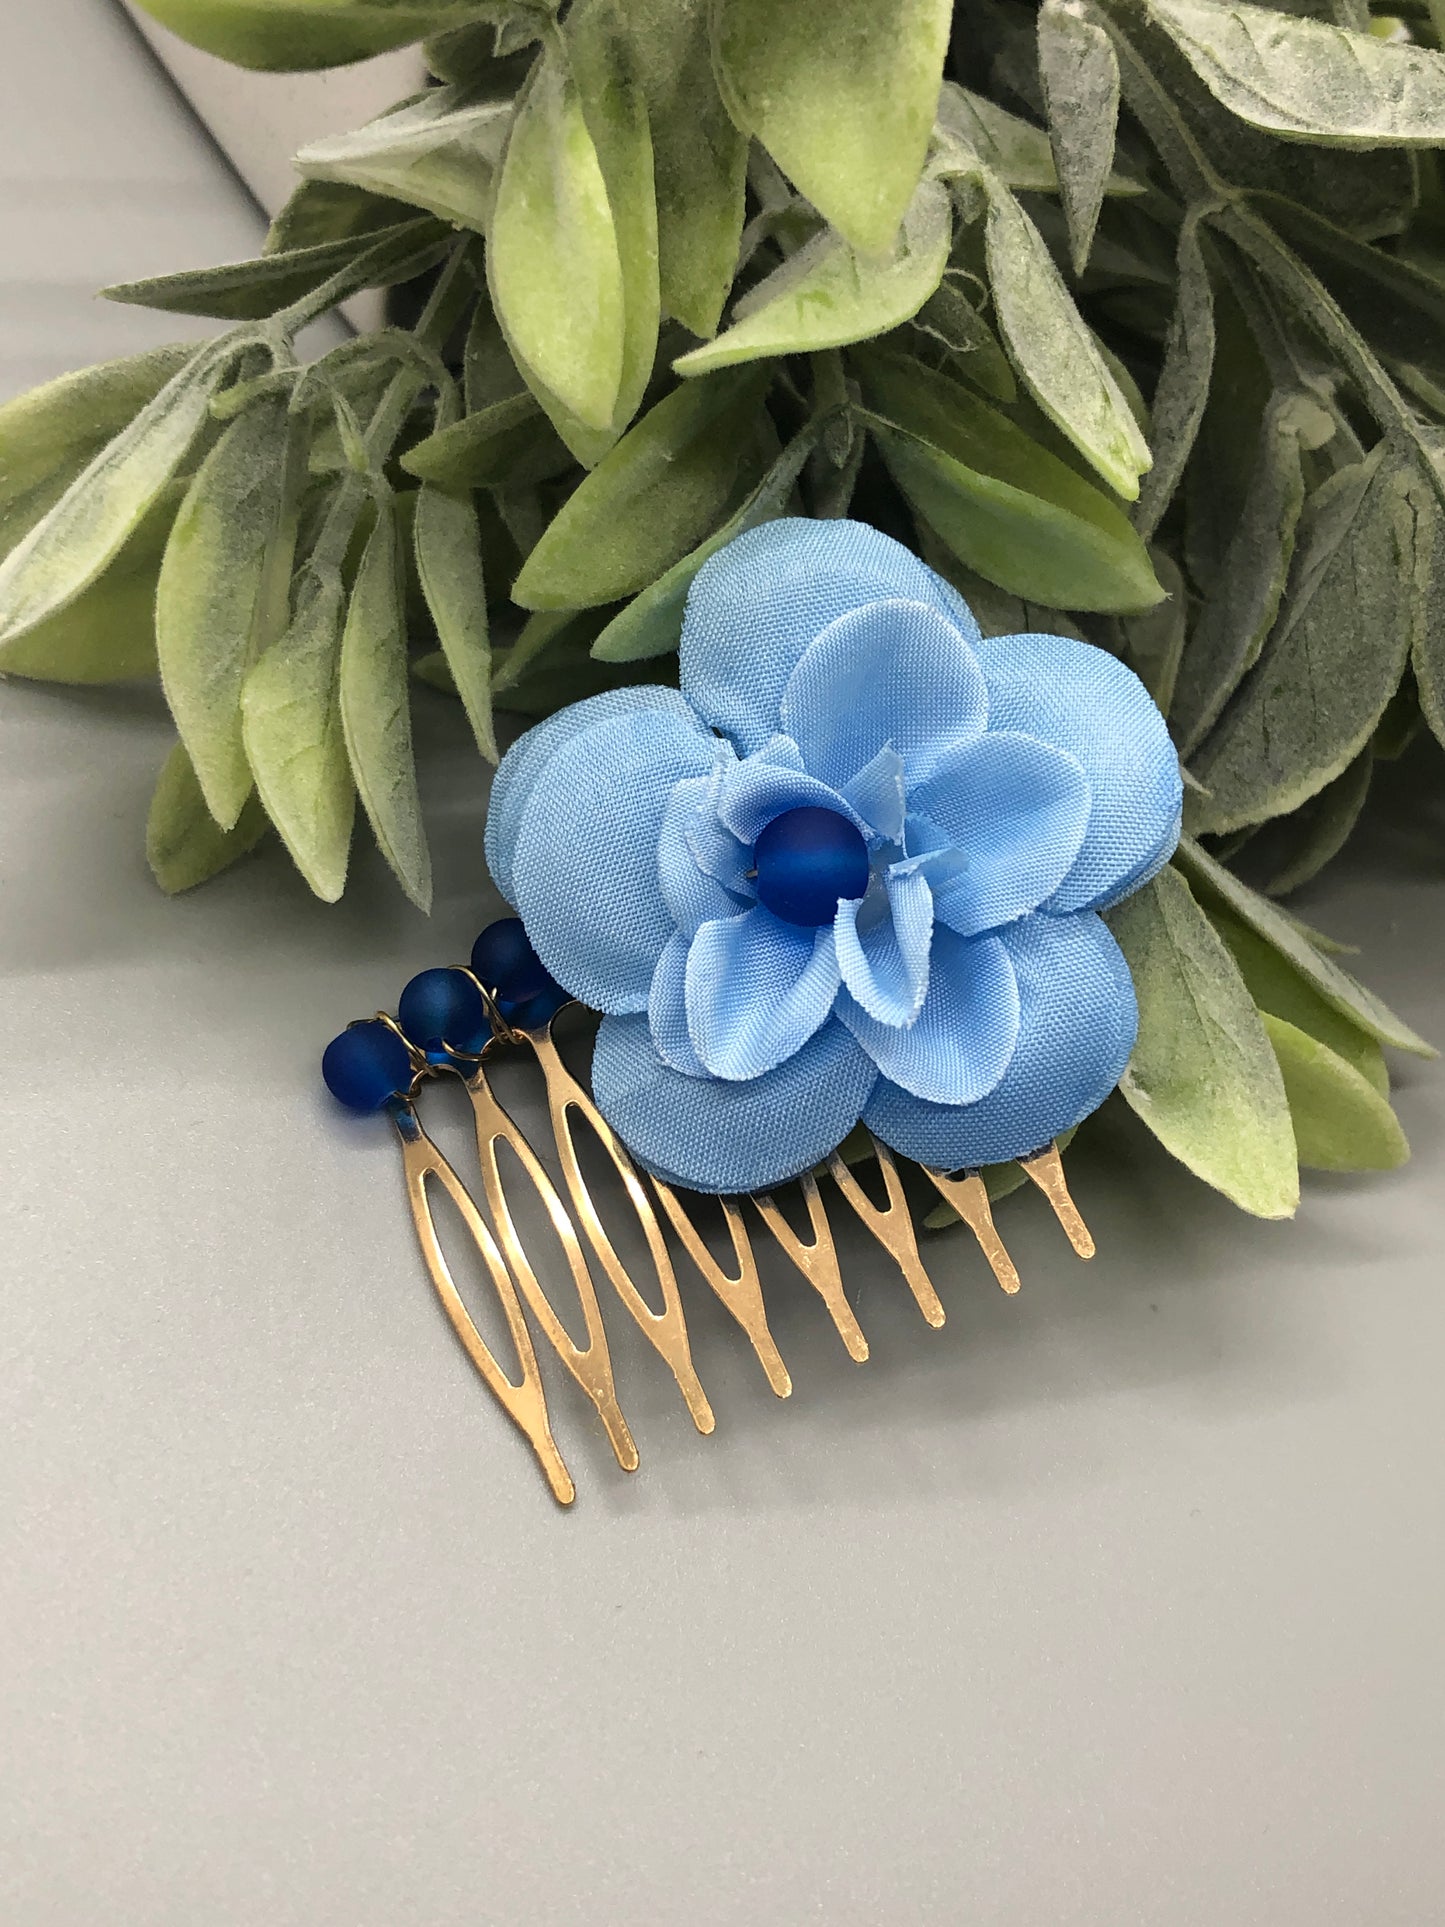 Baby Blue Flower Navy Blue Beads 2.0' Metal Side Comb Retro Vintage Style 1 pc